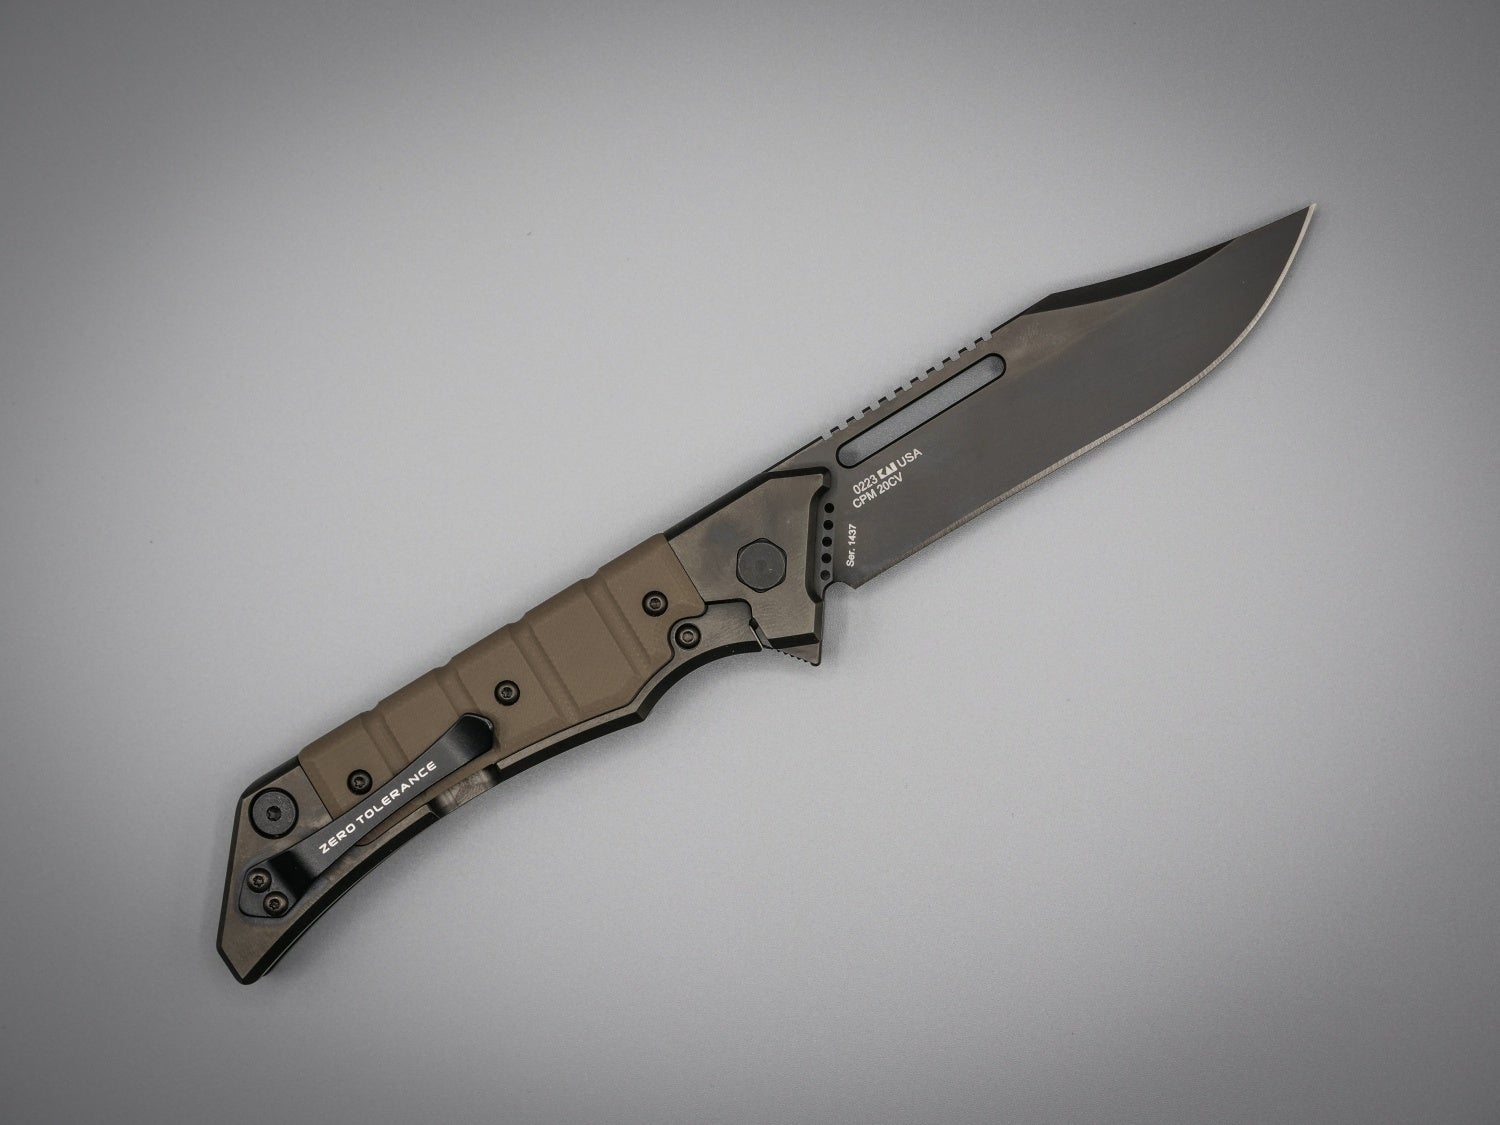 The New Zero Tolerance 0223 Review by Rambo, Hedge Fund Manager